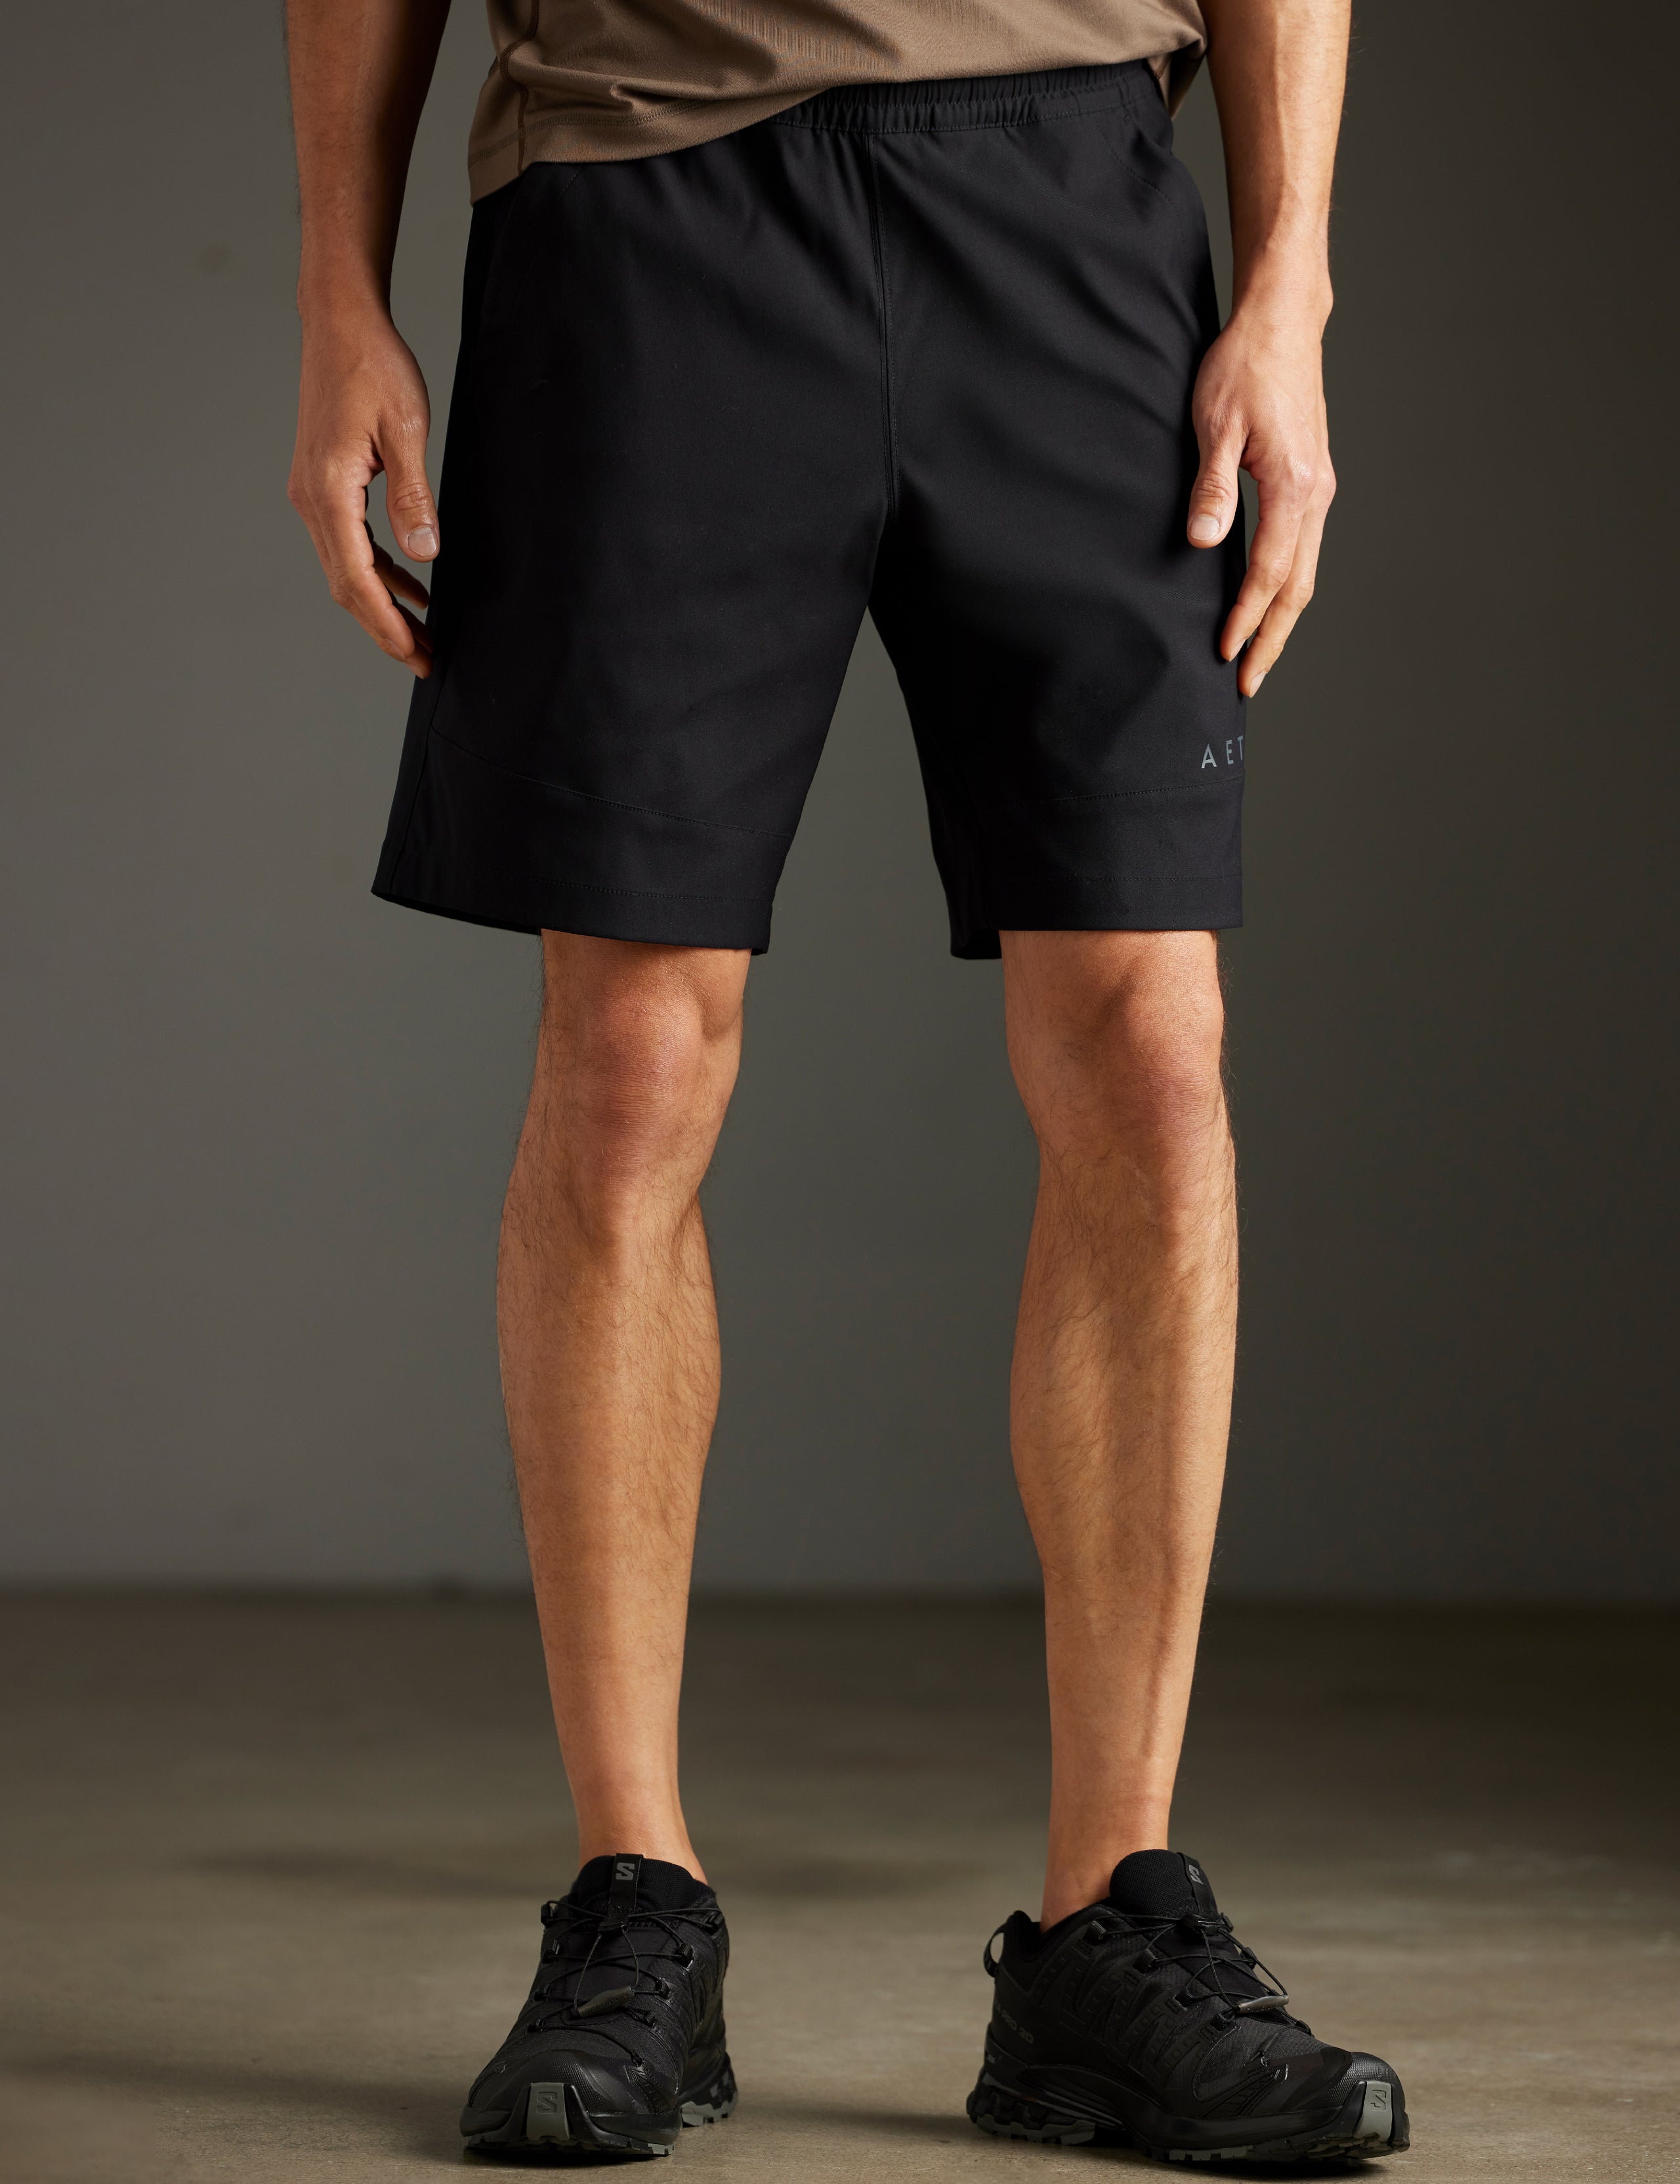 men's black shorts from AETHER Apparel